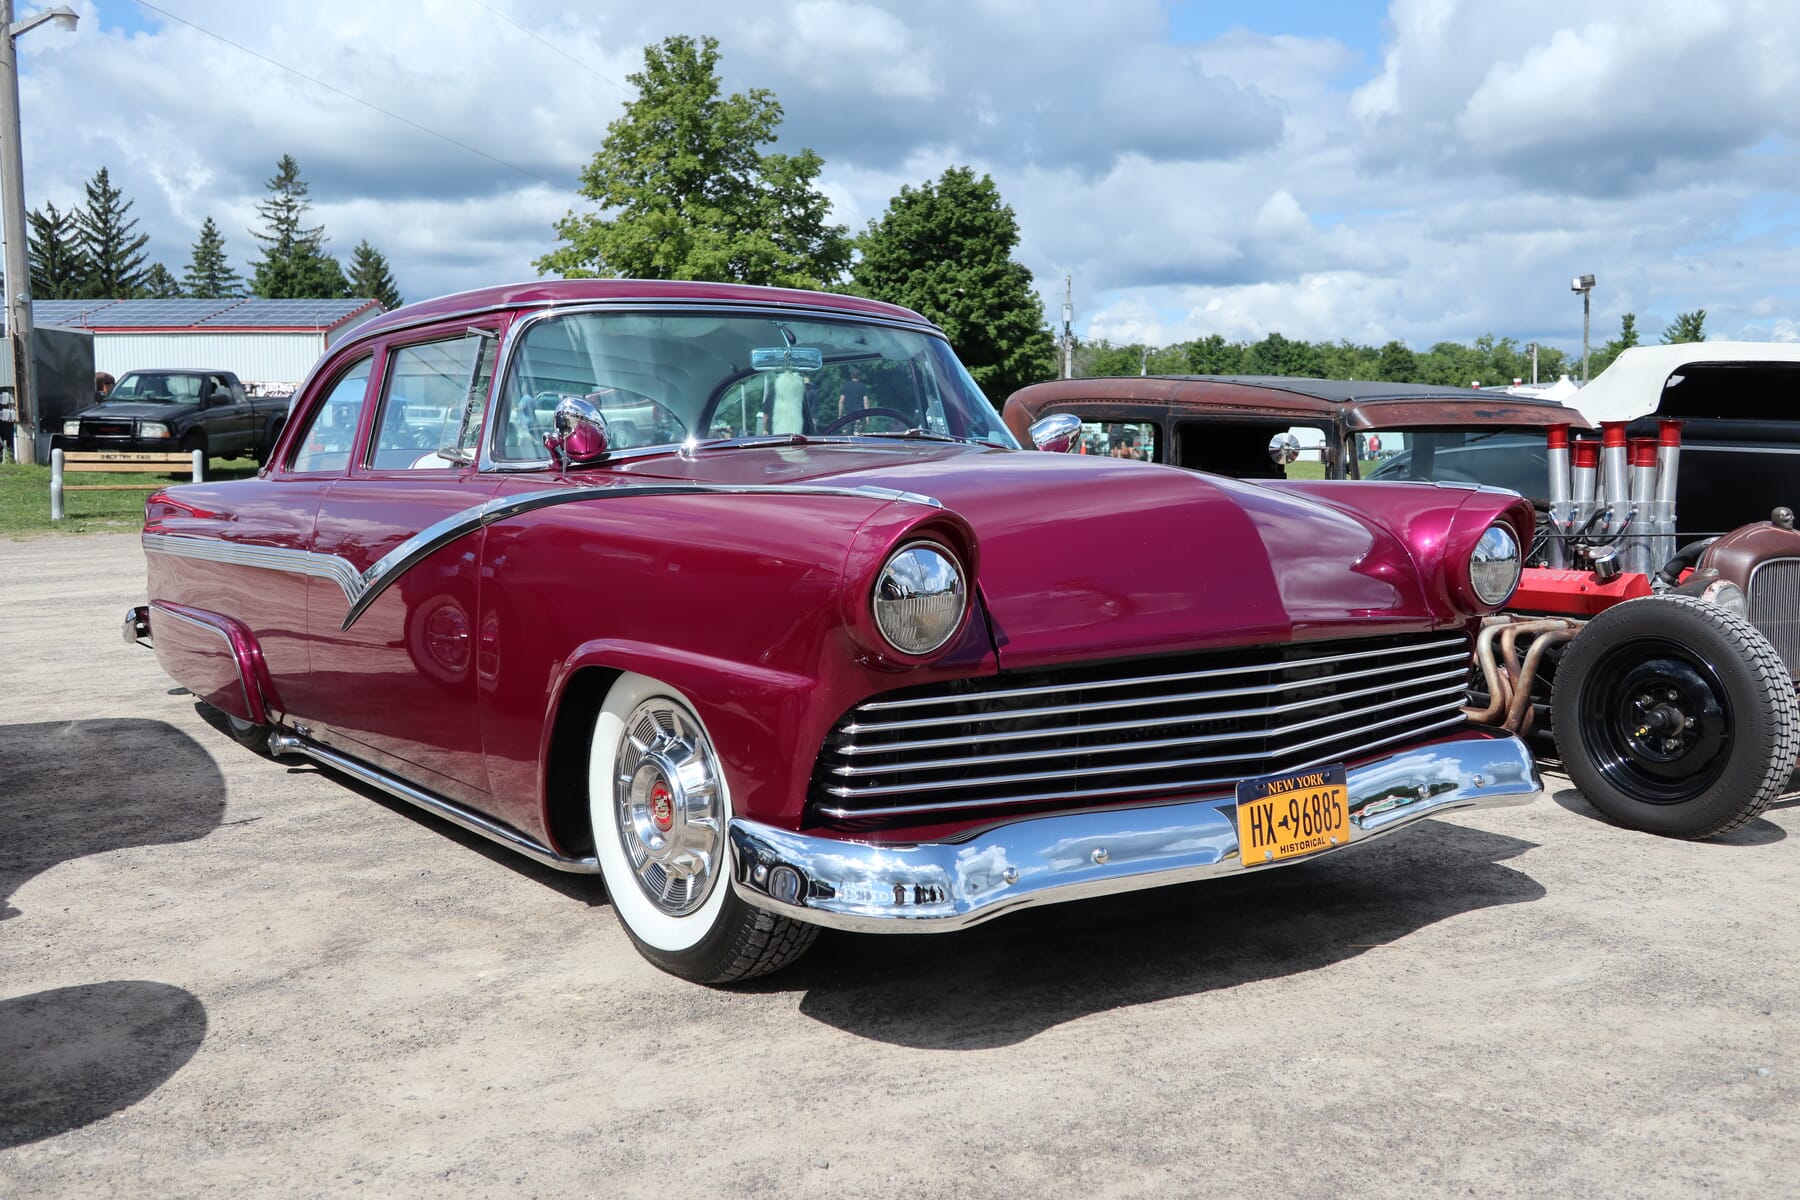 1956 Ford Fairlane pink with whitewall tires visiting from New York